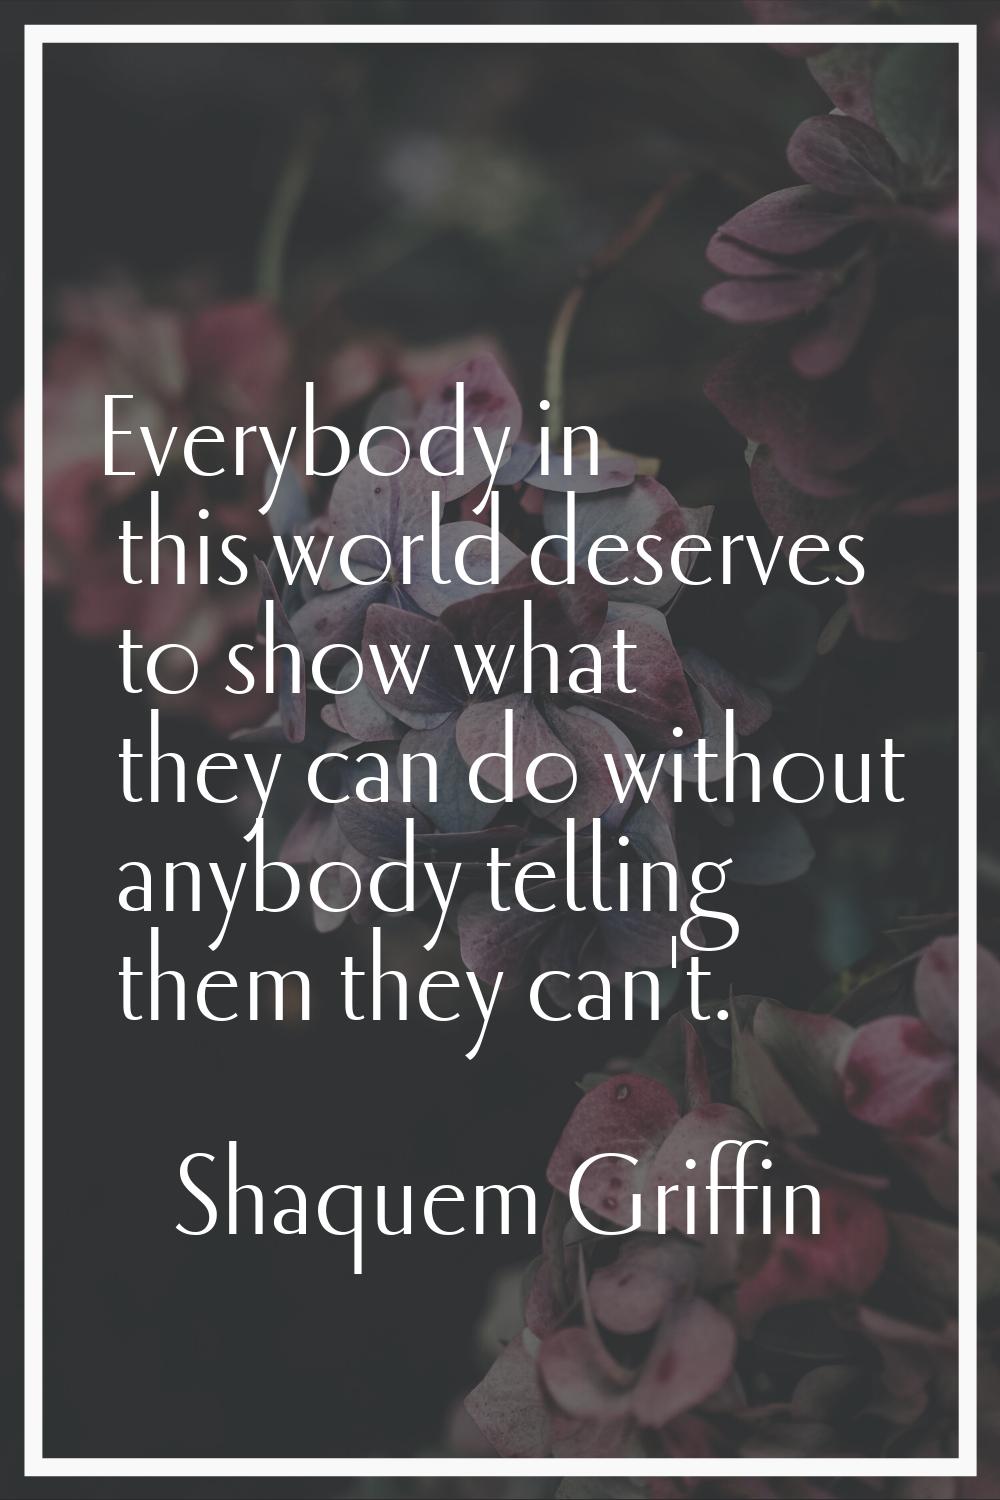 Everybody in this world deserves to show what they can do without anybody telling them they can't.